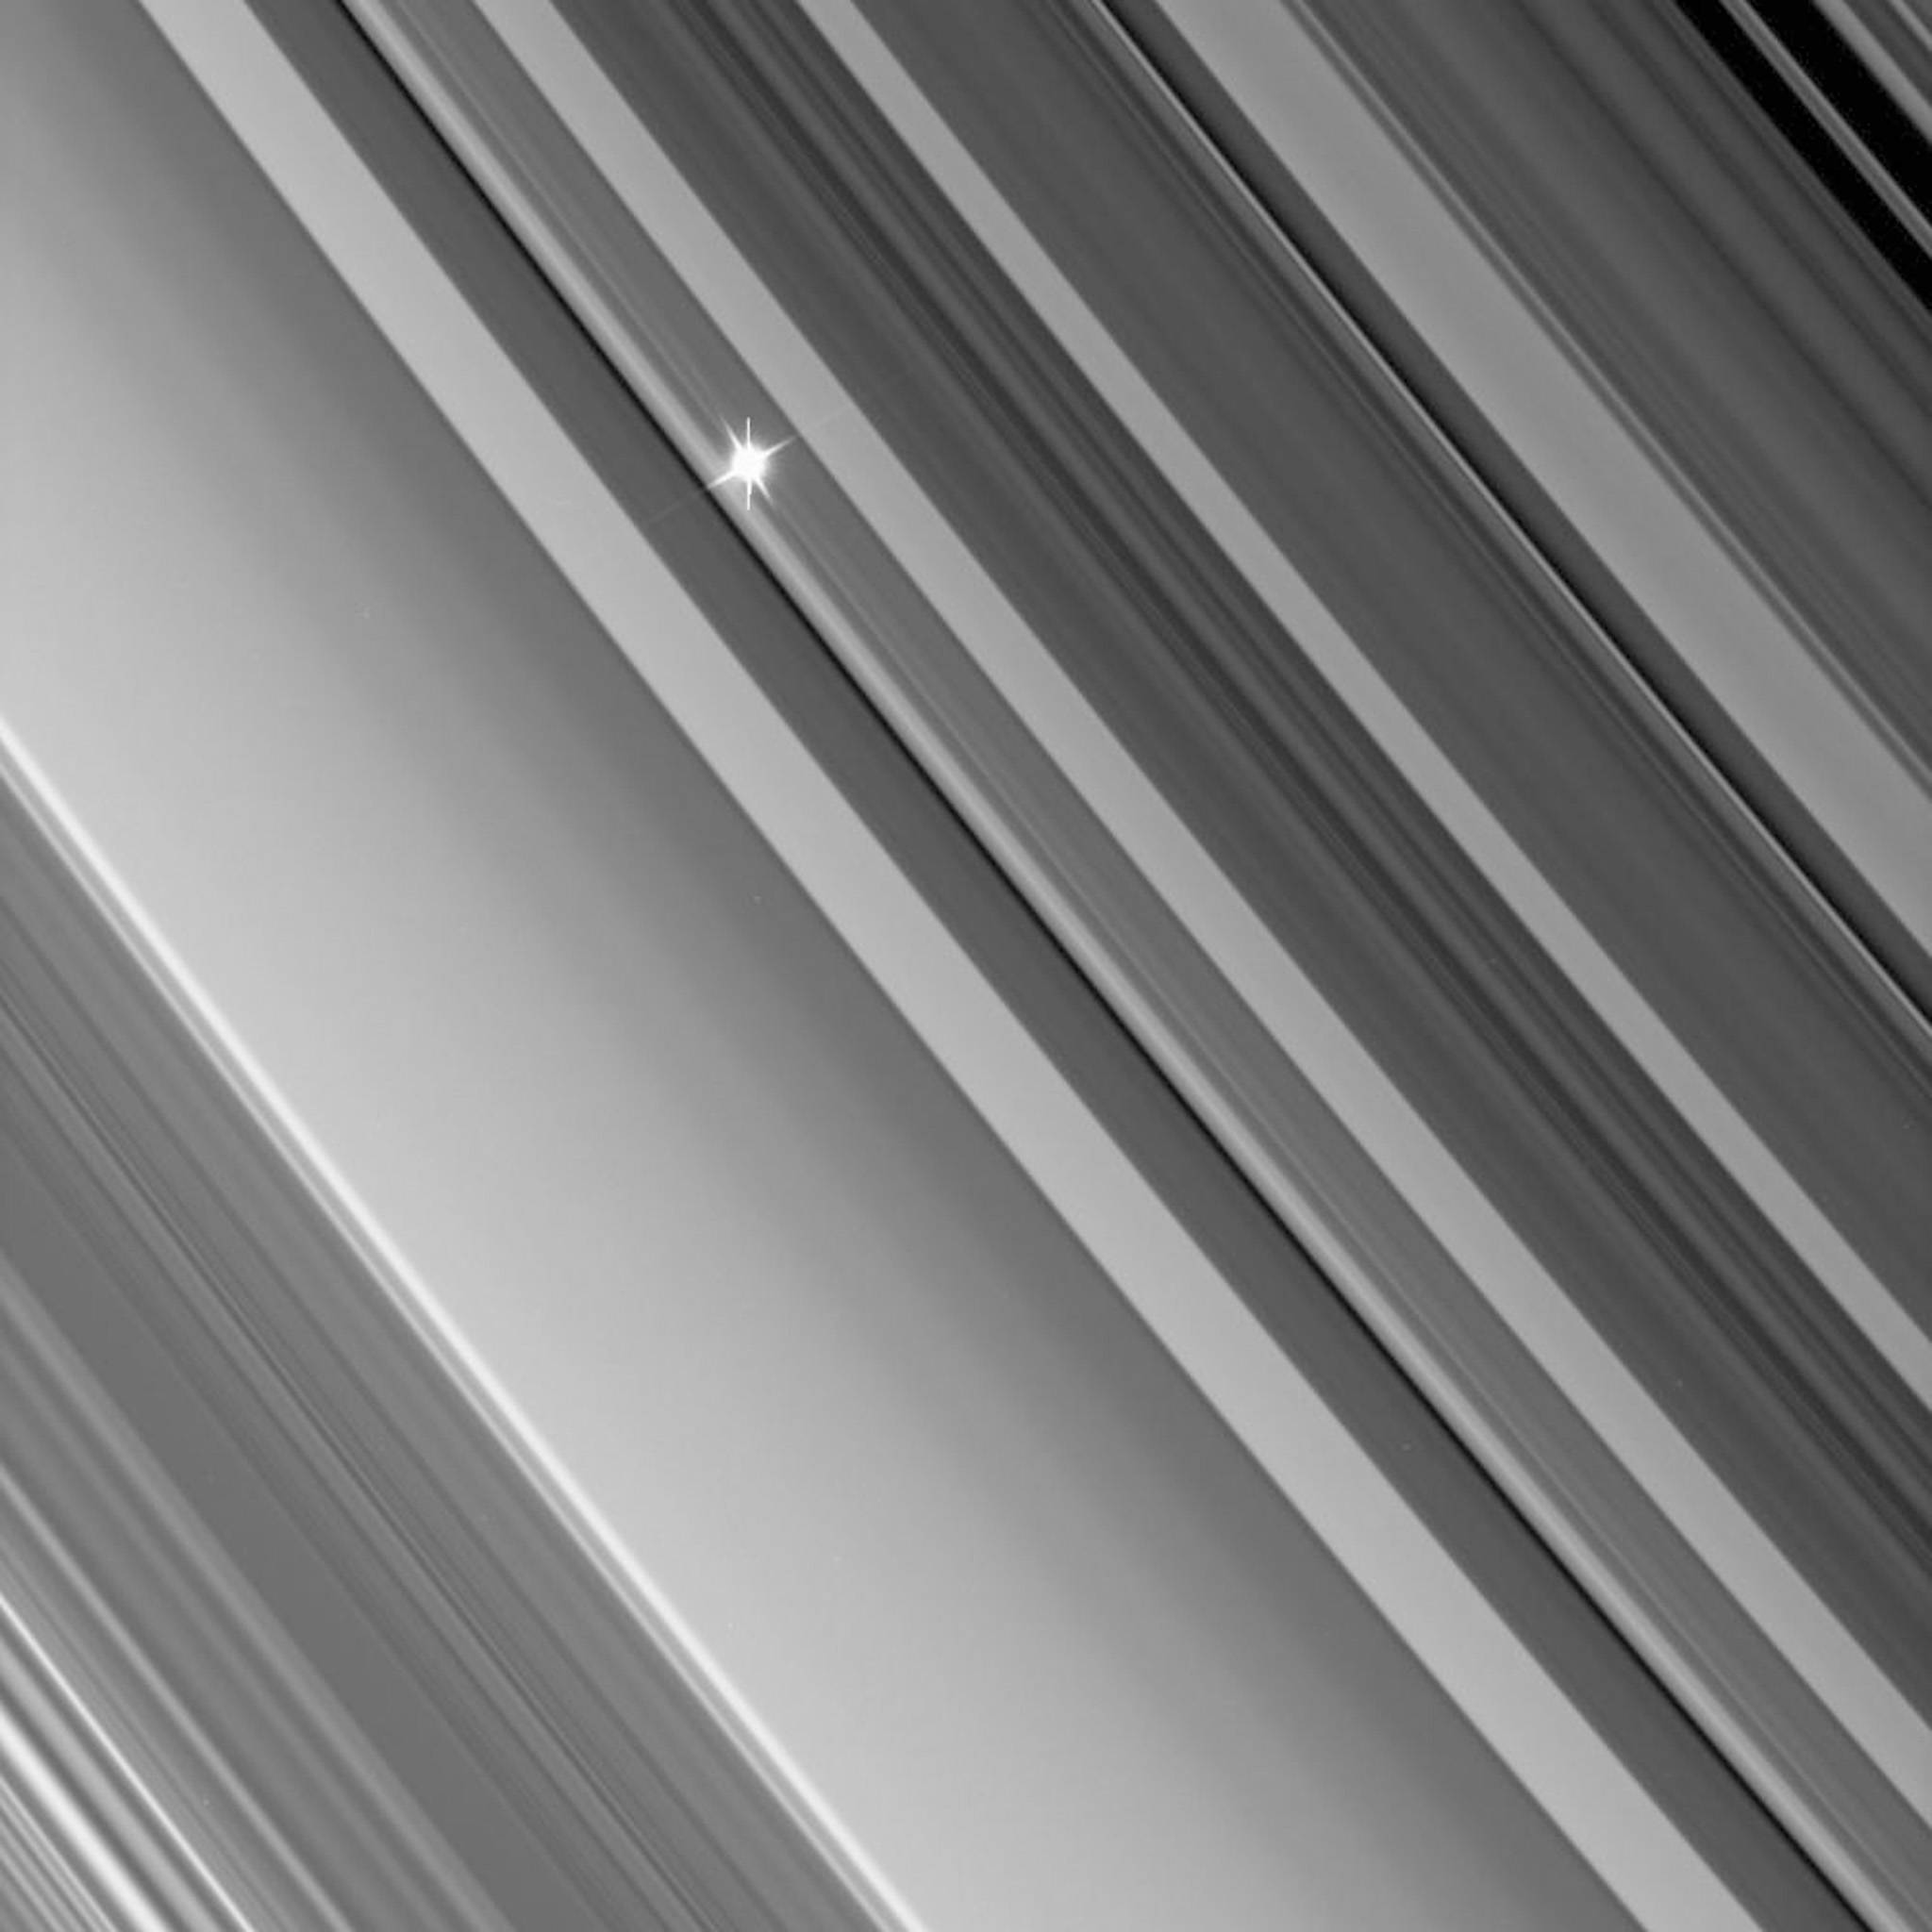 This NASA handout image released 16 October 2006 shows a view from the Cassini spacecraft as it looks through the dense B ring toward a distant star in an image from a recent stellar occultation observation. These observations point the camera toward a star whose brightness is well known. Then, as Cassini watches the rings pass in front, the star's light fluctuates, providing information about the concentrations of ring particles within the various radial features in the rings. This view looks toward the unlit side of the rings from about 35 degrees above the ringplane. The star's image is partly saturated, causing the vertical lines that extend up and down. The image was taken in visible light with the Cassini spacecraft narrow-angle camera on 26 September, 2006 at a distance of approximately 543,000 kilometers (338,000 miles) from Saturn and at a Sun-Saturn-spacecraft, or phase, angle of 106 degrees. Image scale is about 3 kilometers (2 miles) per pixel. AFP PHOTO/NASA/JPL/SPACE SCIENCE INSTITUTE =GETTY OUT=

 / AFP PHOTO / NASA/JPL / HO